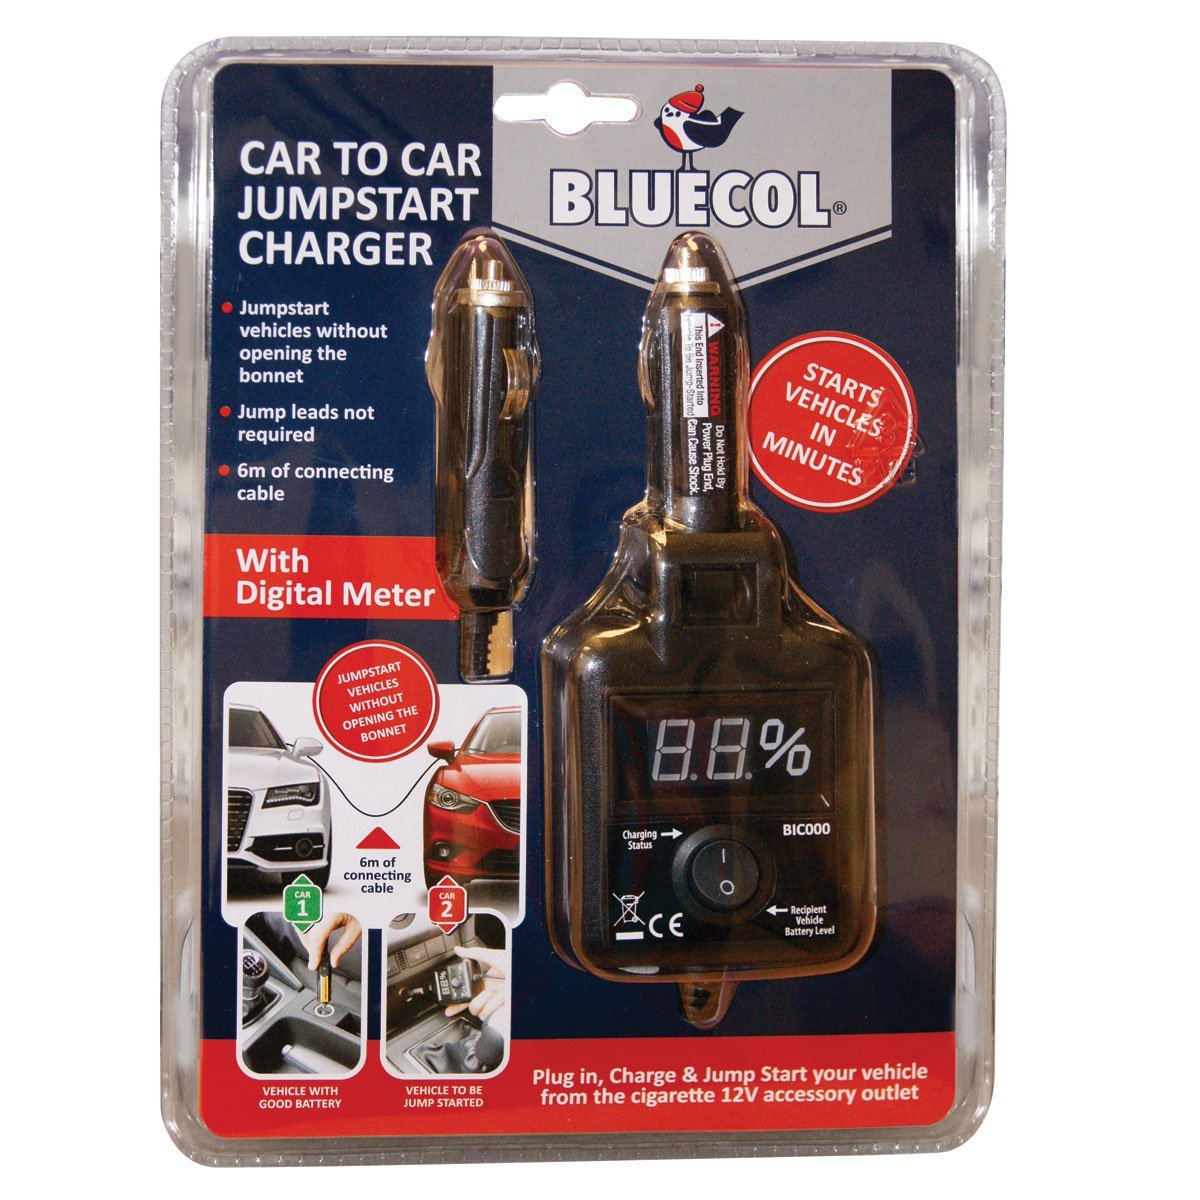 Bluecol Car To Car Charger 12v Jump Starter Cables BIC000 - Emergency